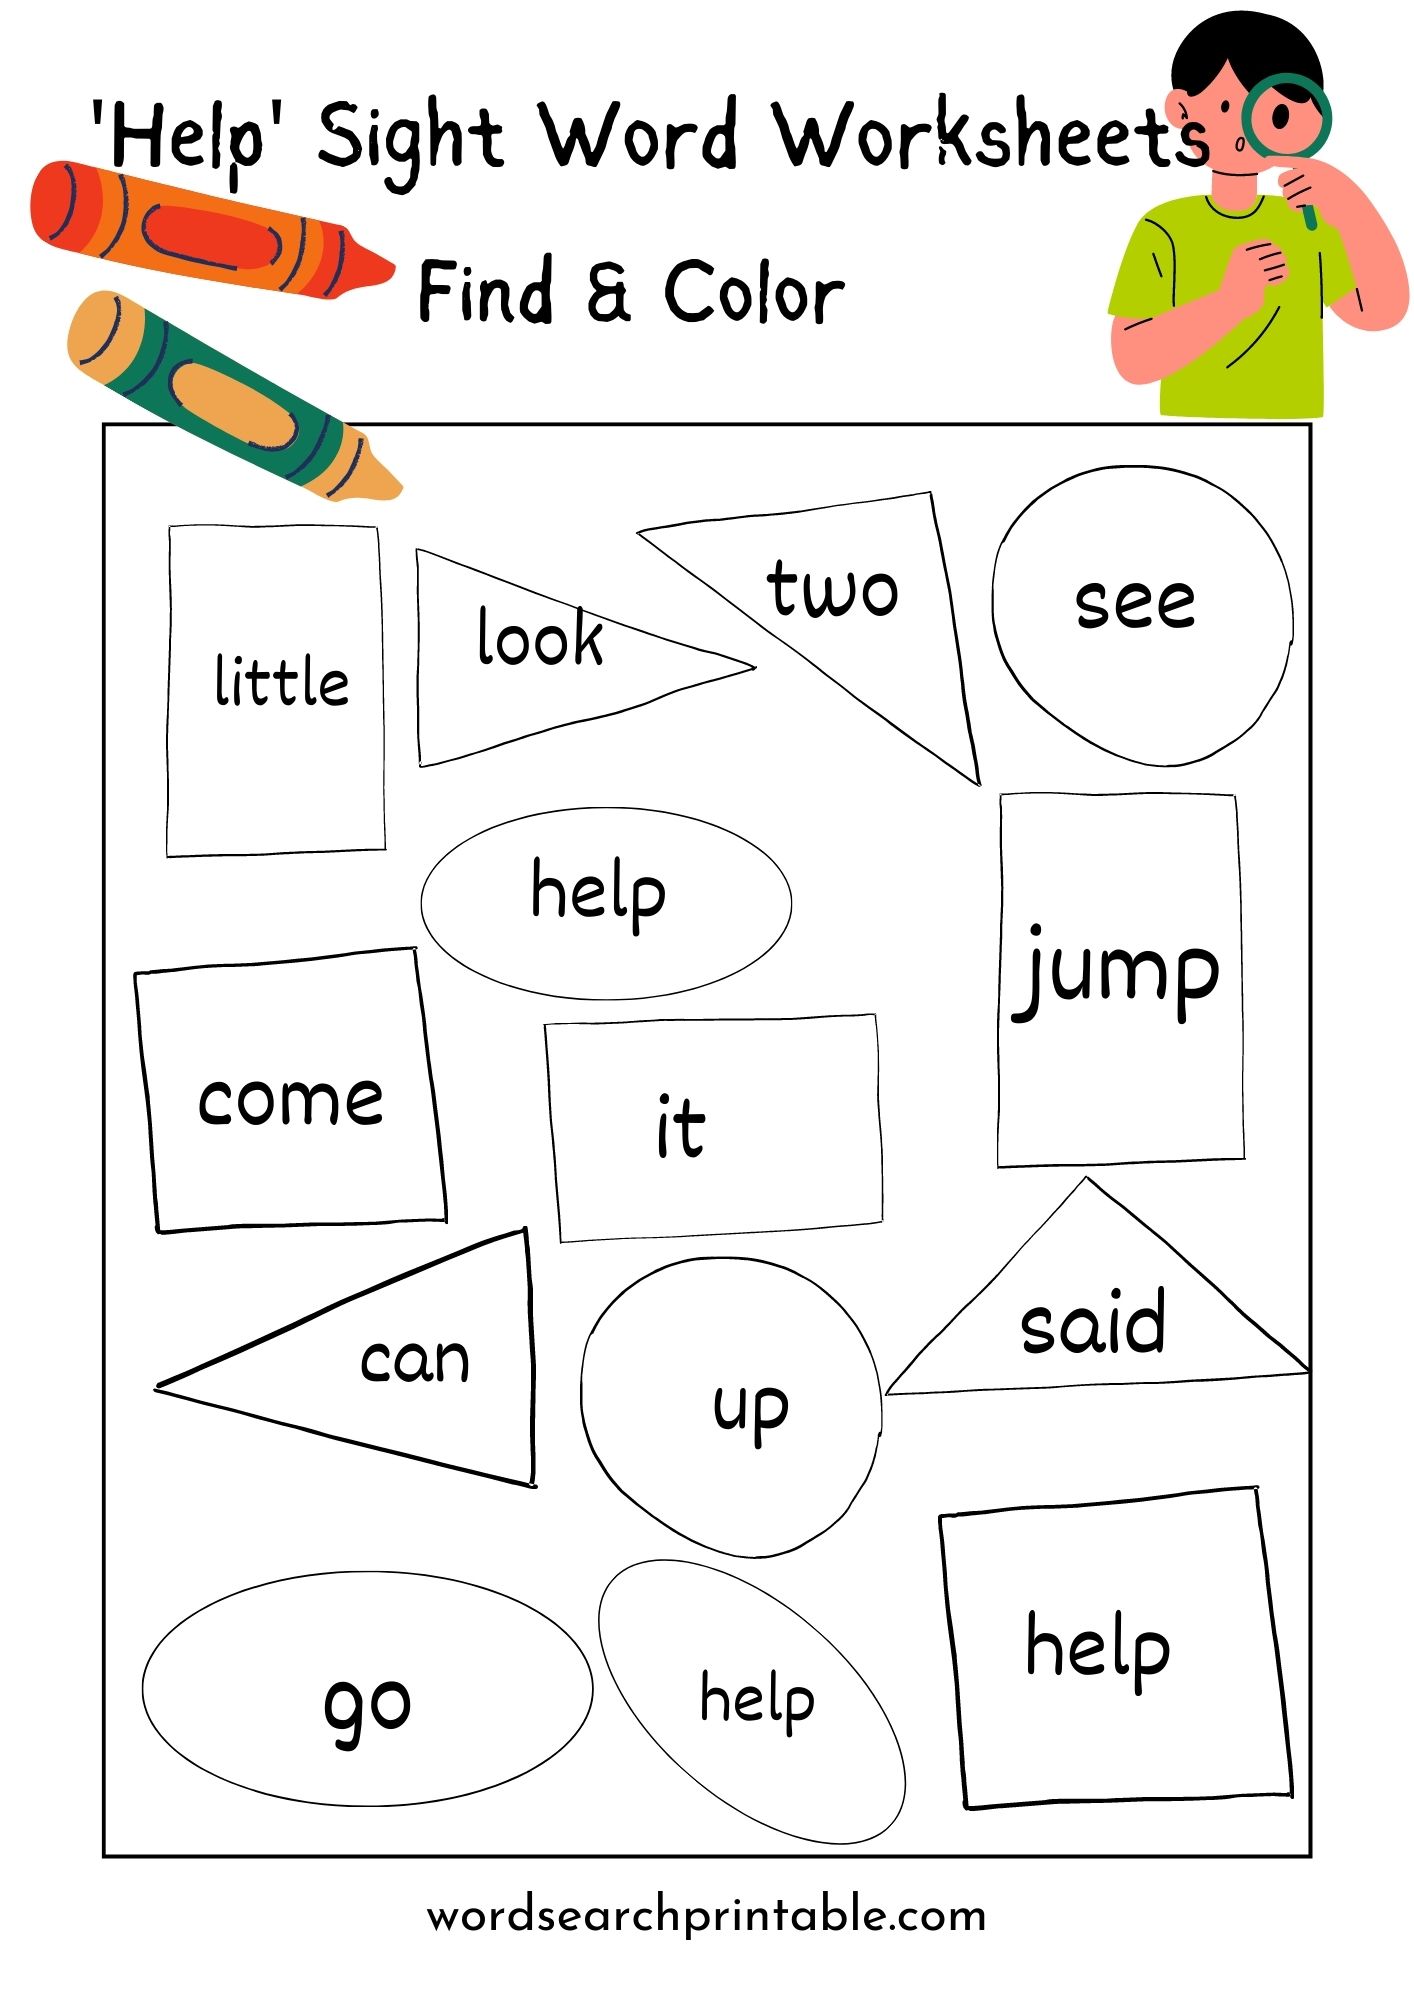 Find sight word Help and Color the geometric shape